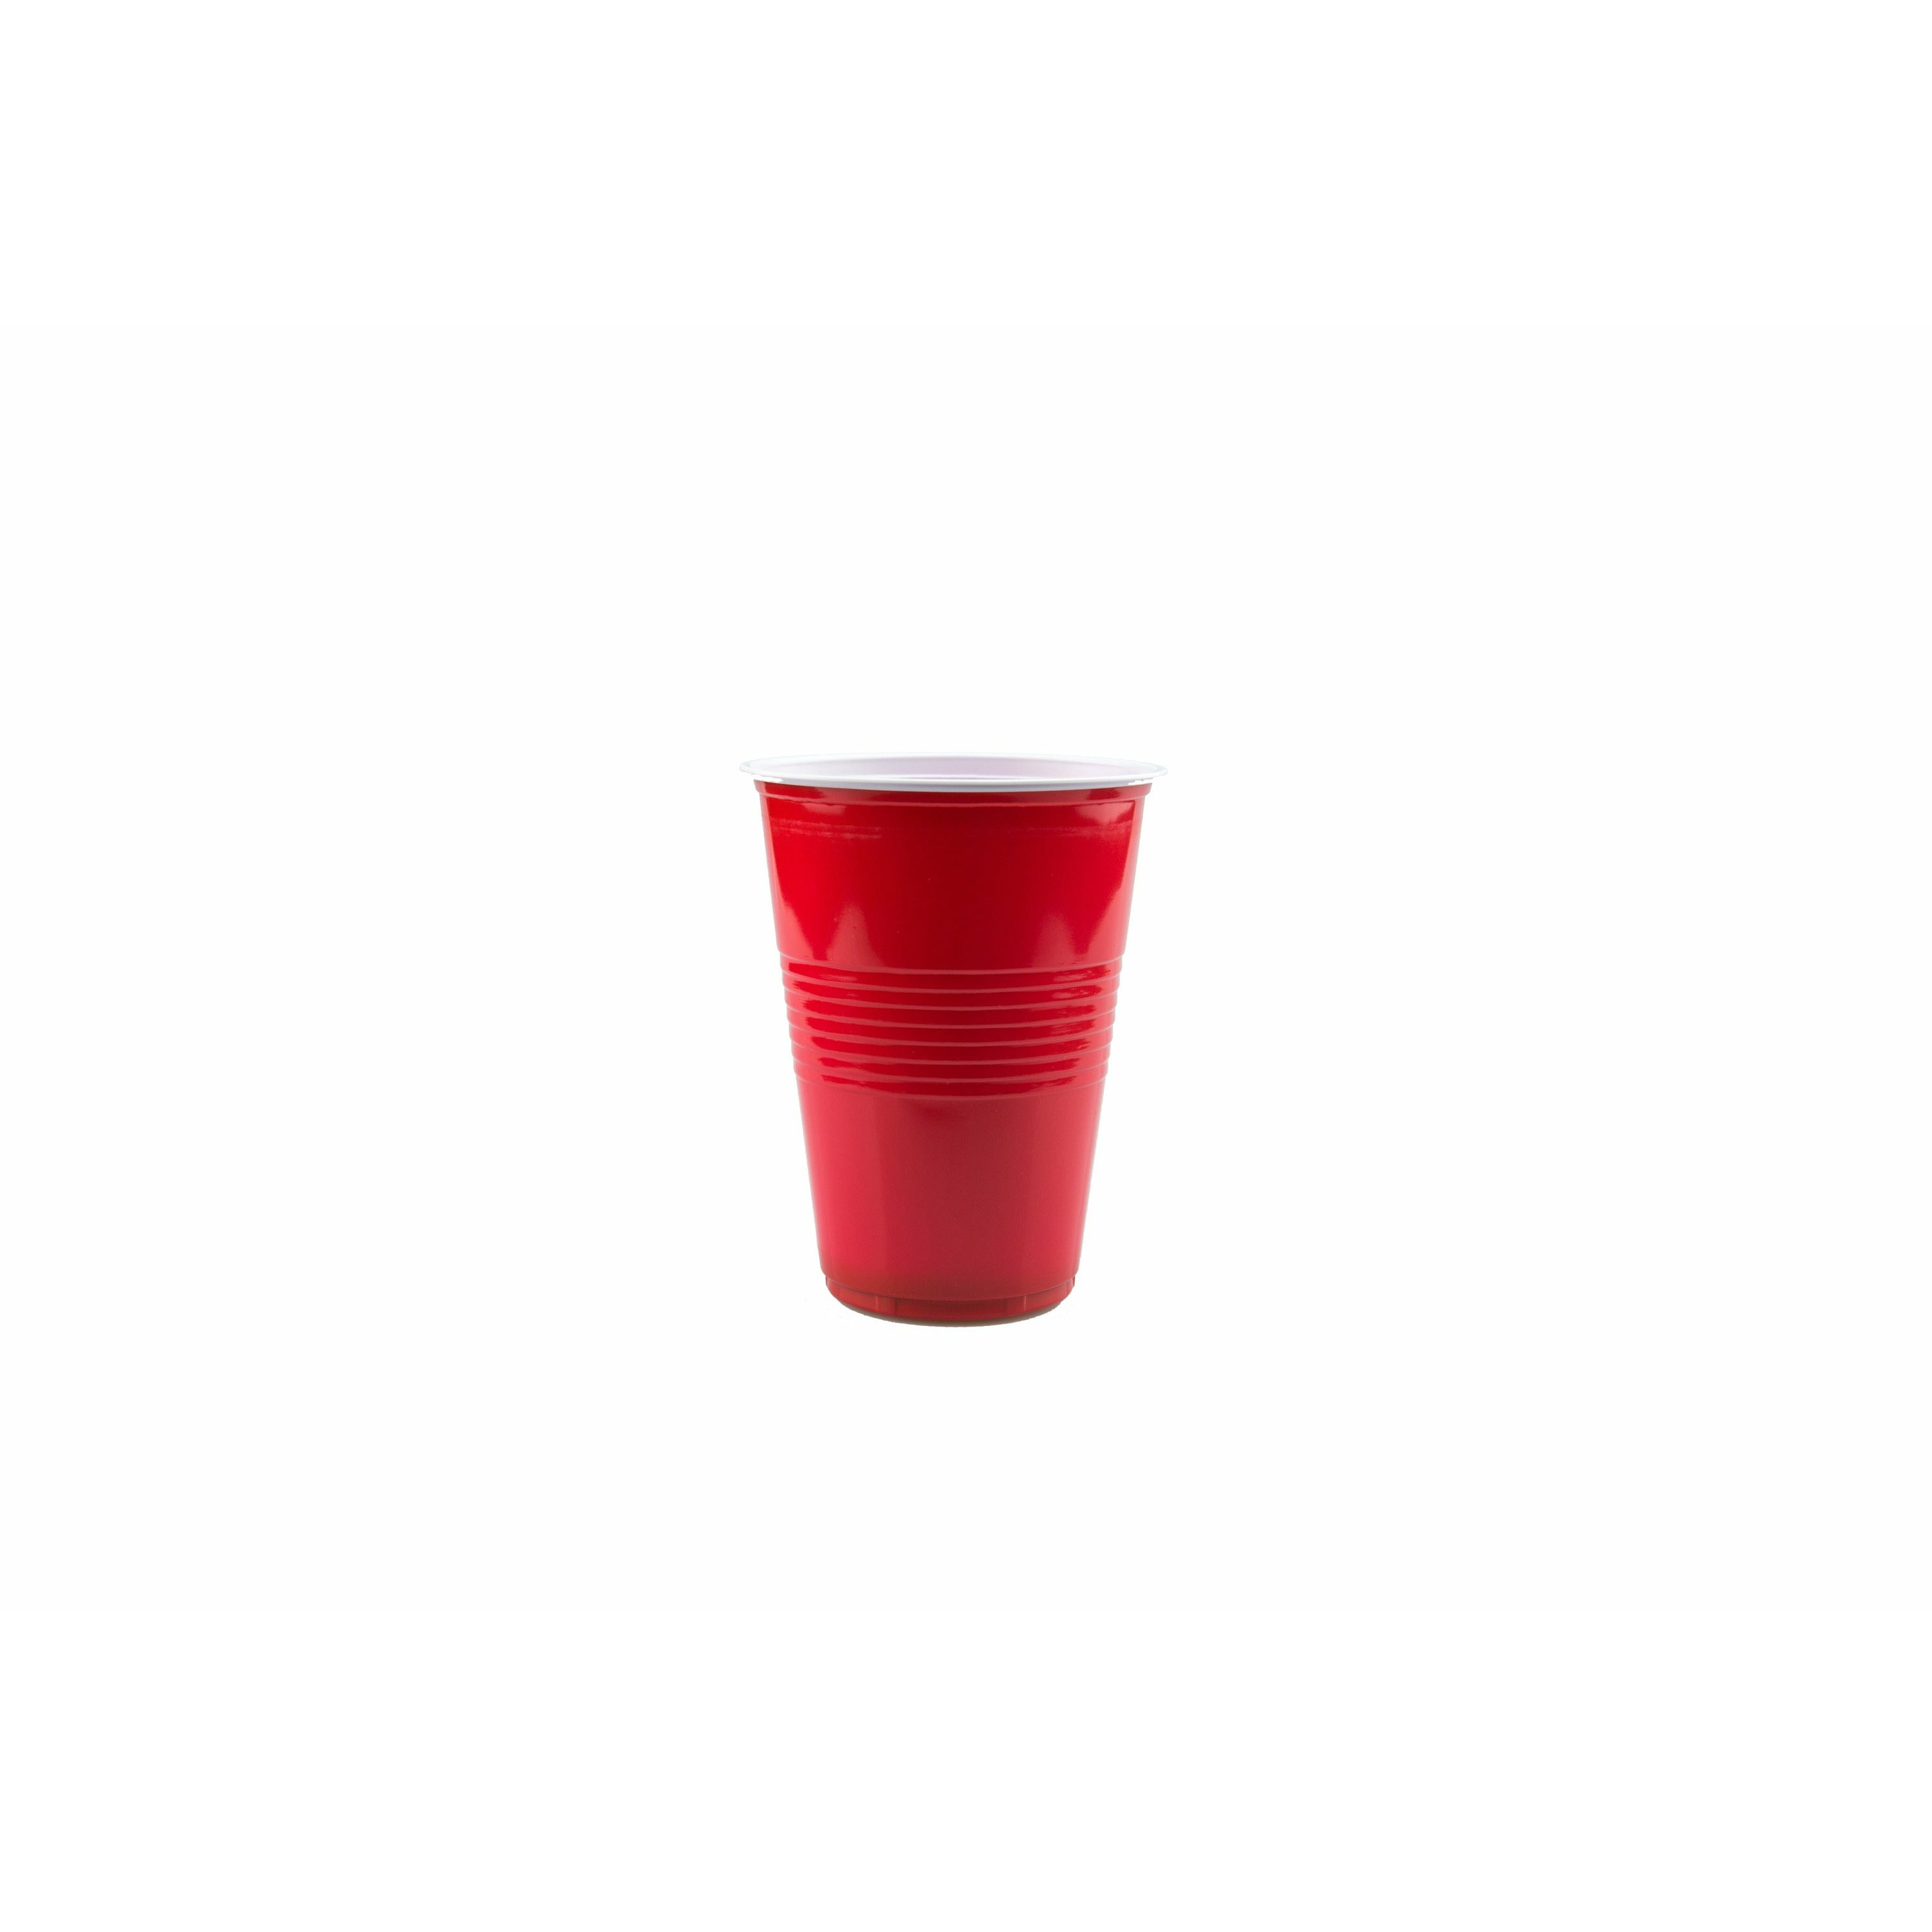 Partyware Stong Reusable Red Plastic Cups - 12 Pack 500ml Default Title